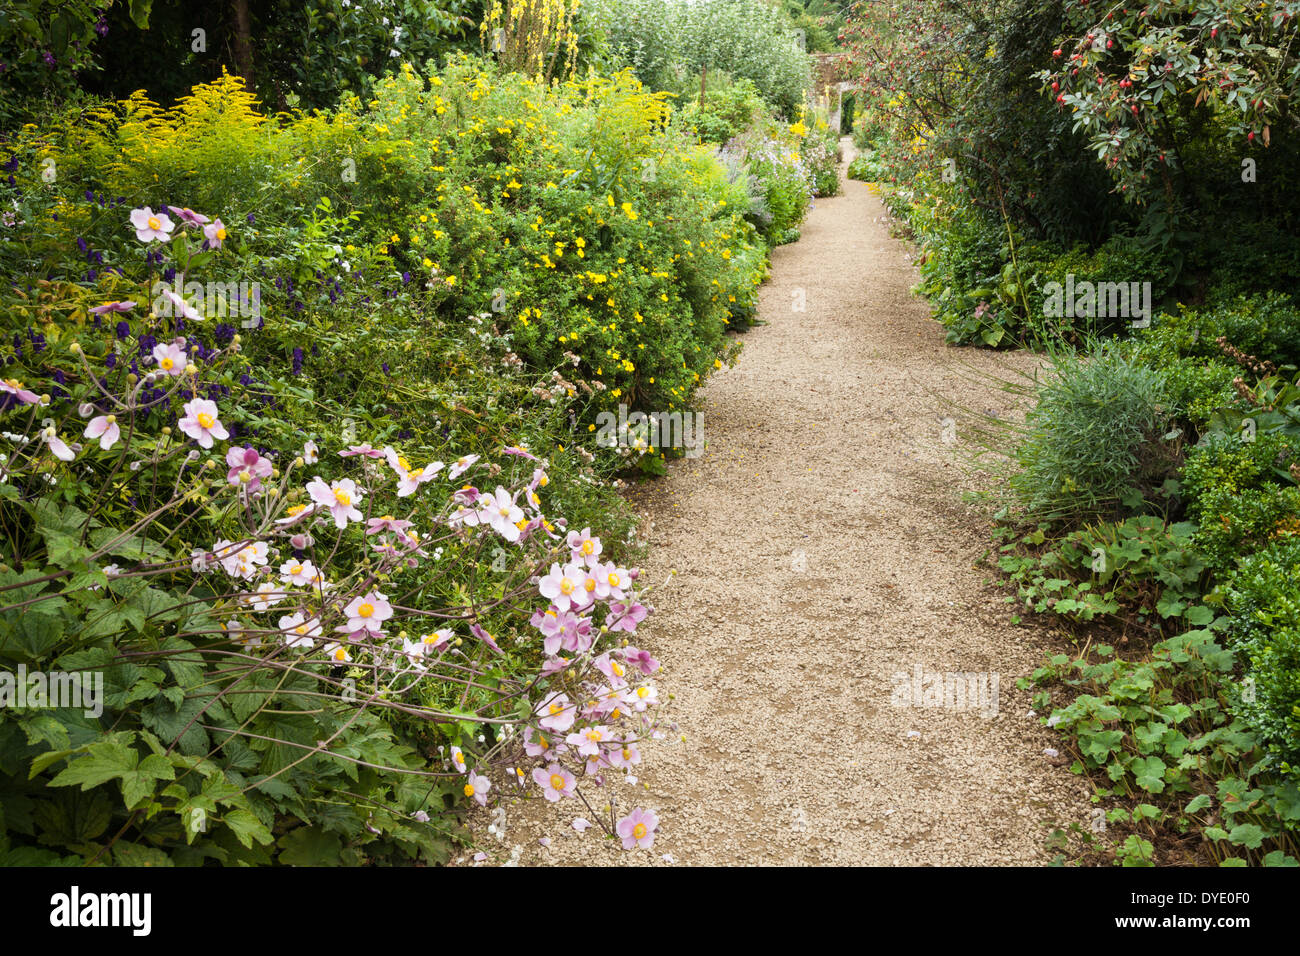 A garden path in early September lined by herbaceous borders with late summer flowering plants, Rousham House, Oxfordshire, England Stock Photo